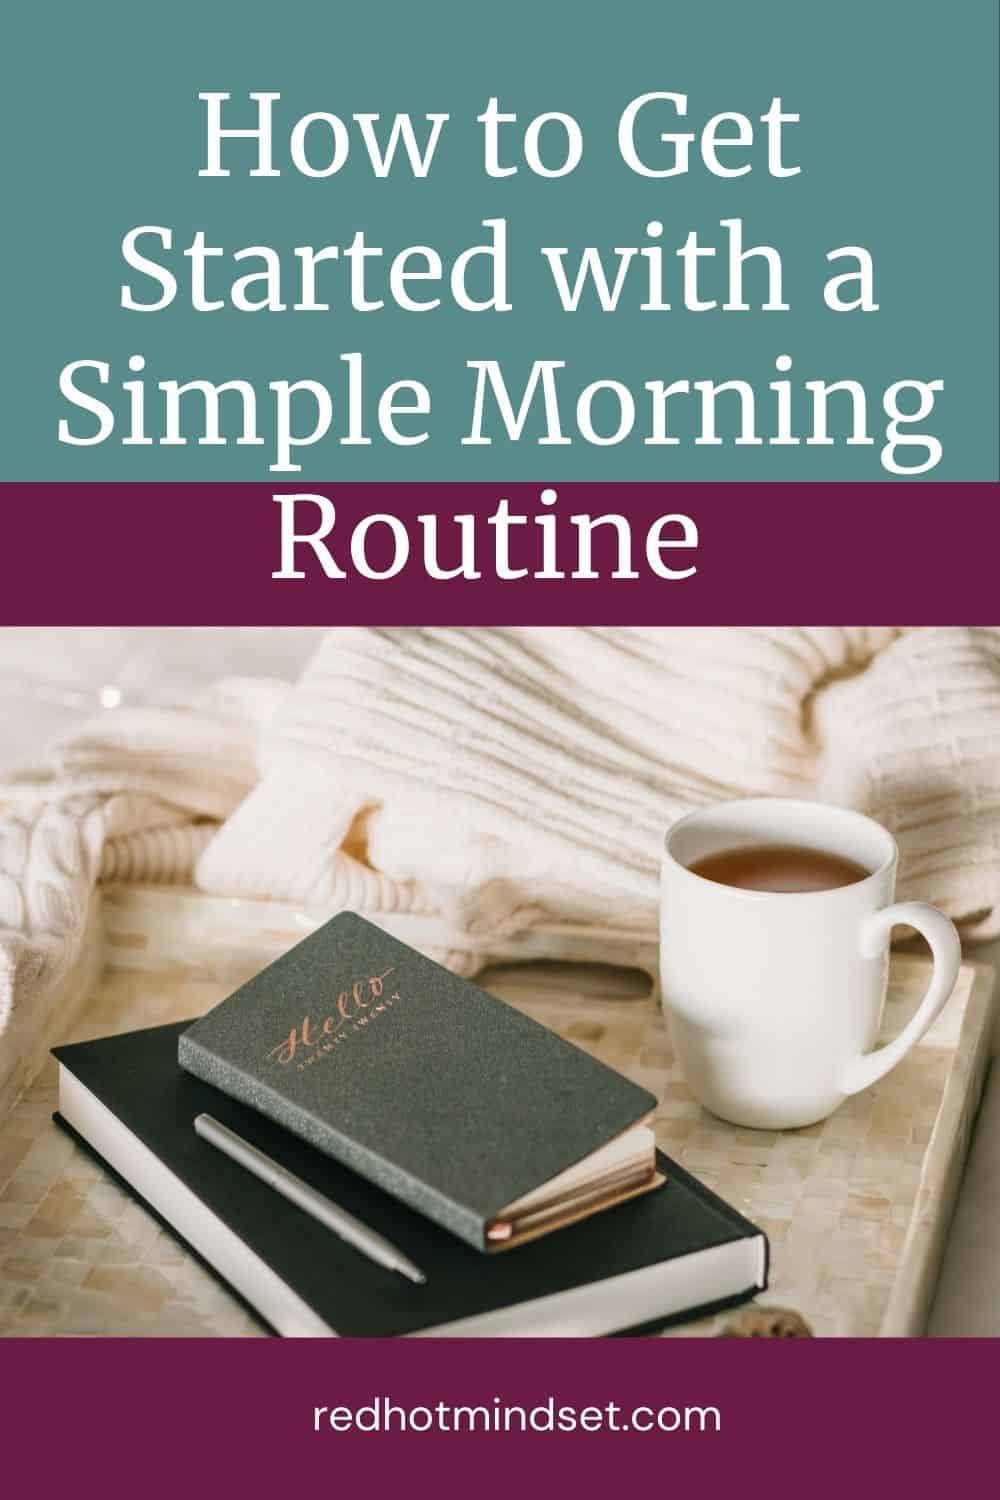 Ep 137 | Find ME Time for Your Goals by Getting Started with a Simple Morning Routine